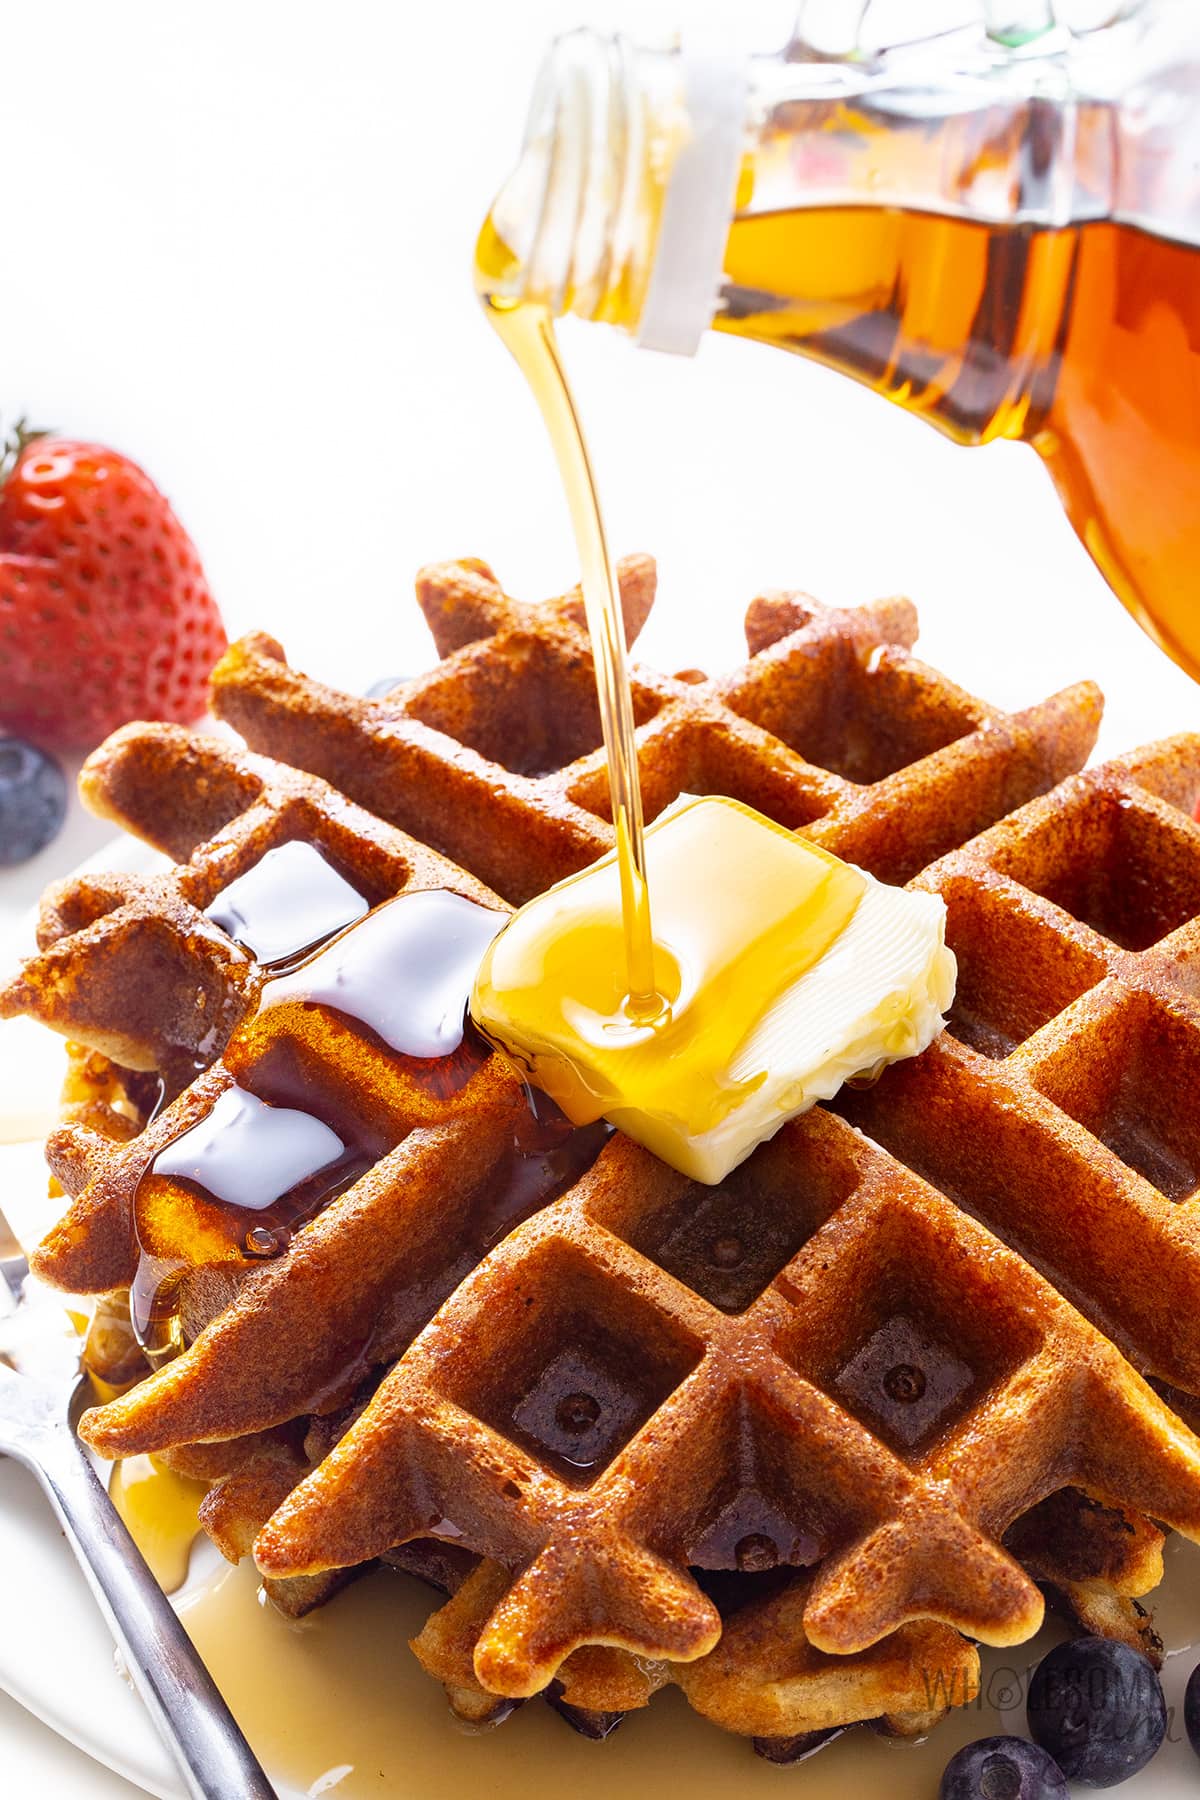 Keto almond flour waffles with butter and sugar-free syrup.